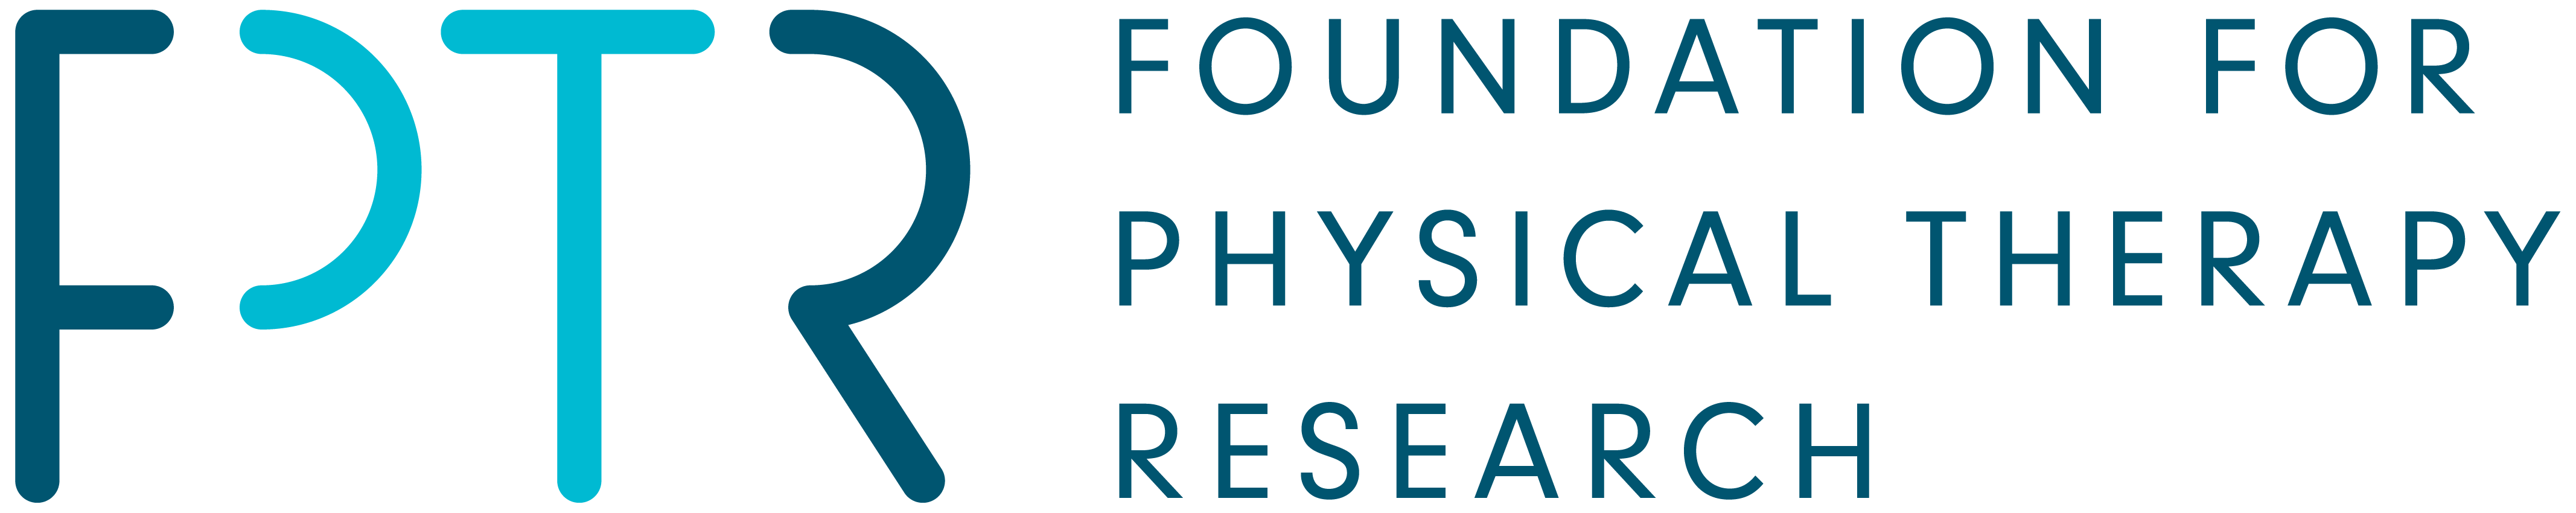 Foundation for Physical Therapy